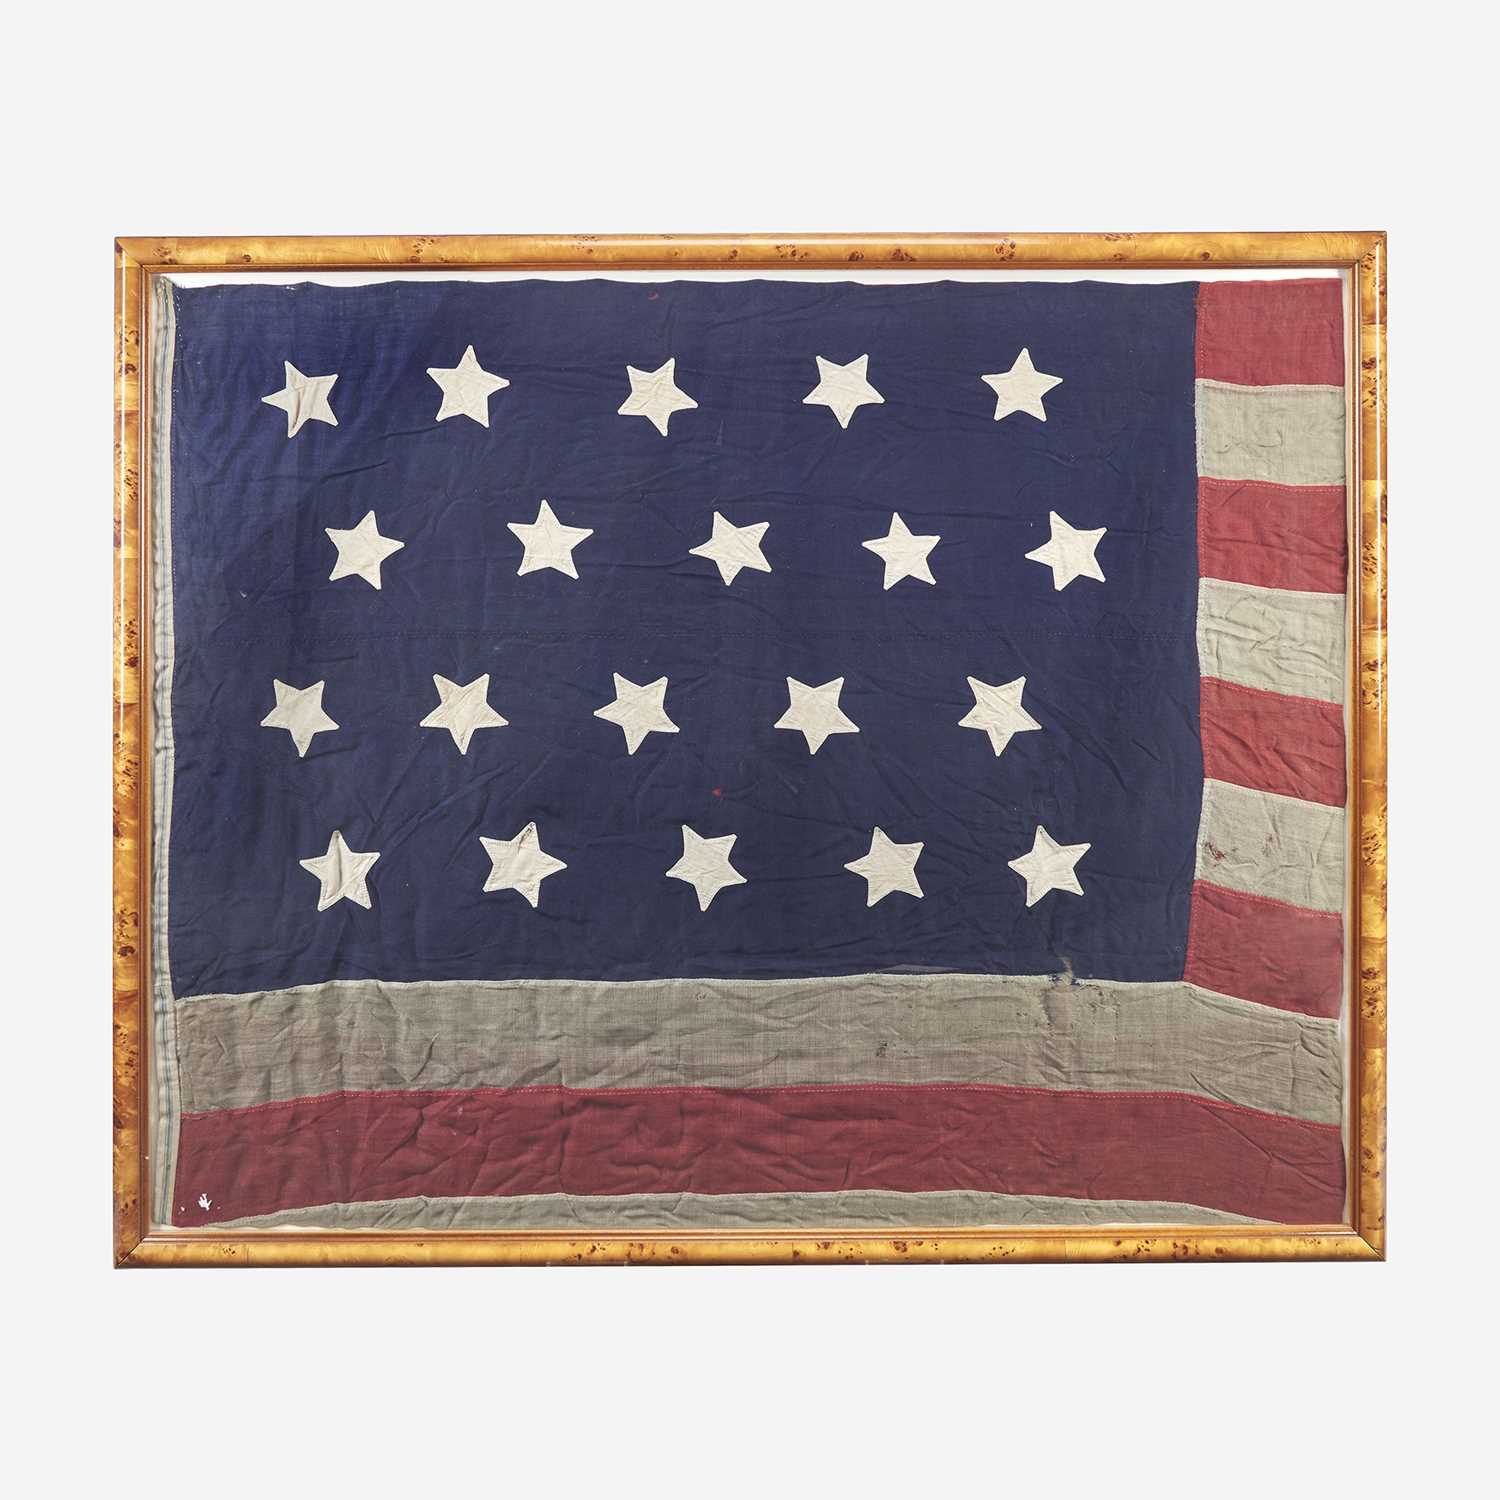 Lot 11 - A 20-Star American National Exclusionary Flag